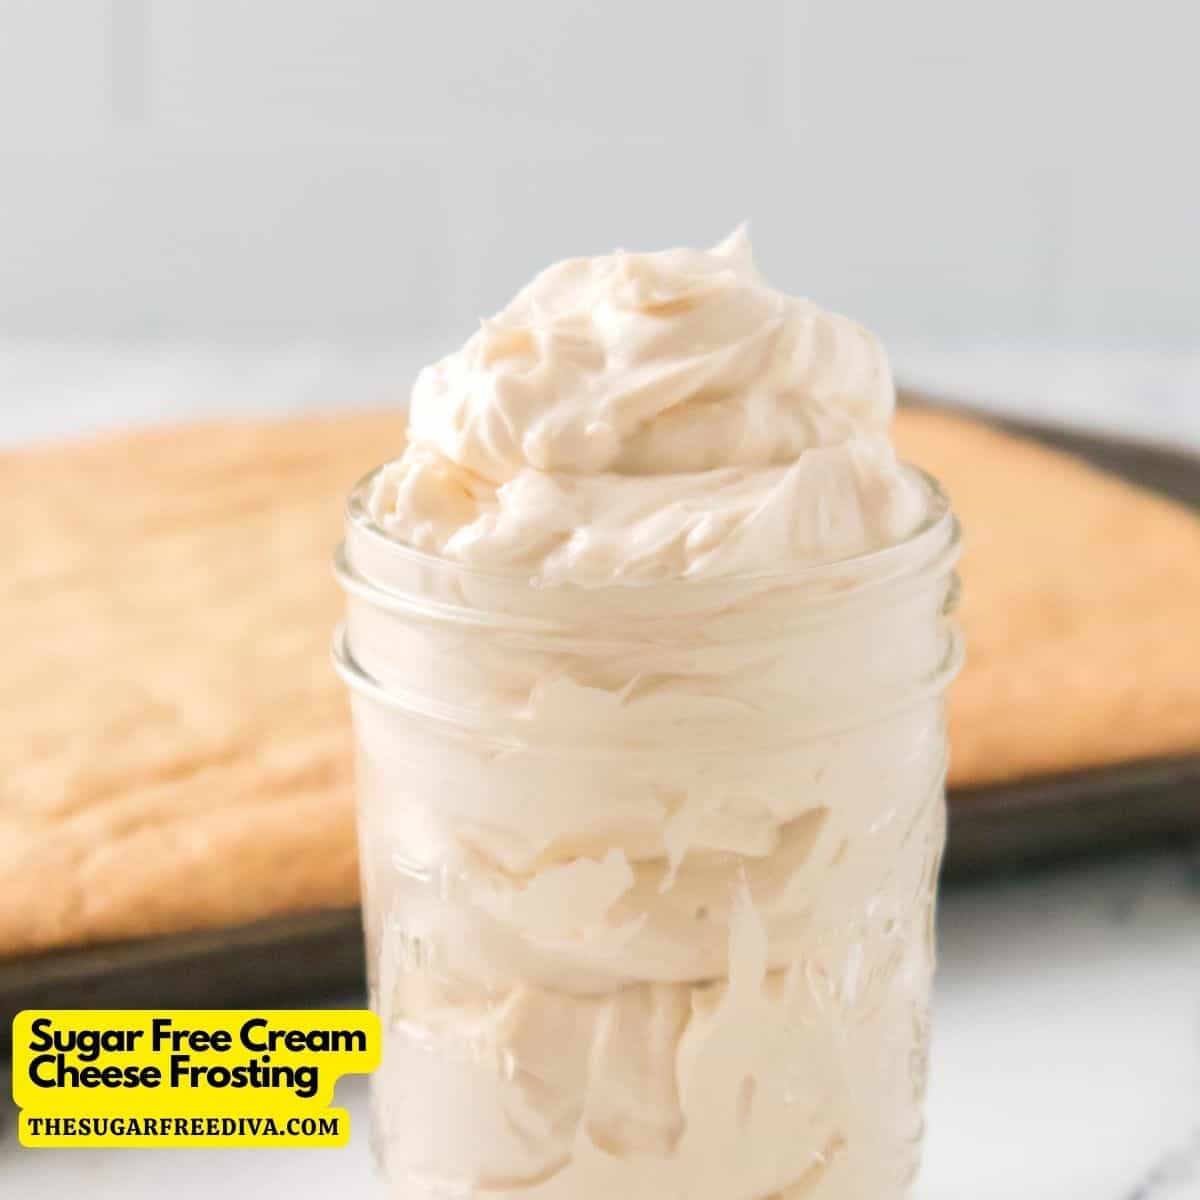 5 Ingredient Sugar Free Cream Cheese Frosting, a simple and delicious recipe for homemade dessert frosting made with no added sugar. 